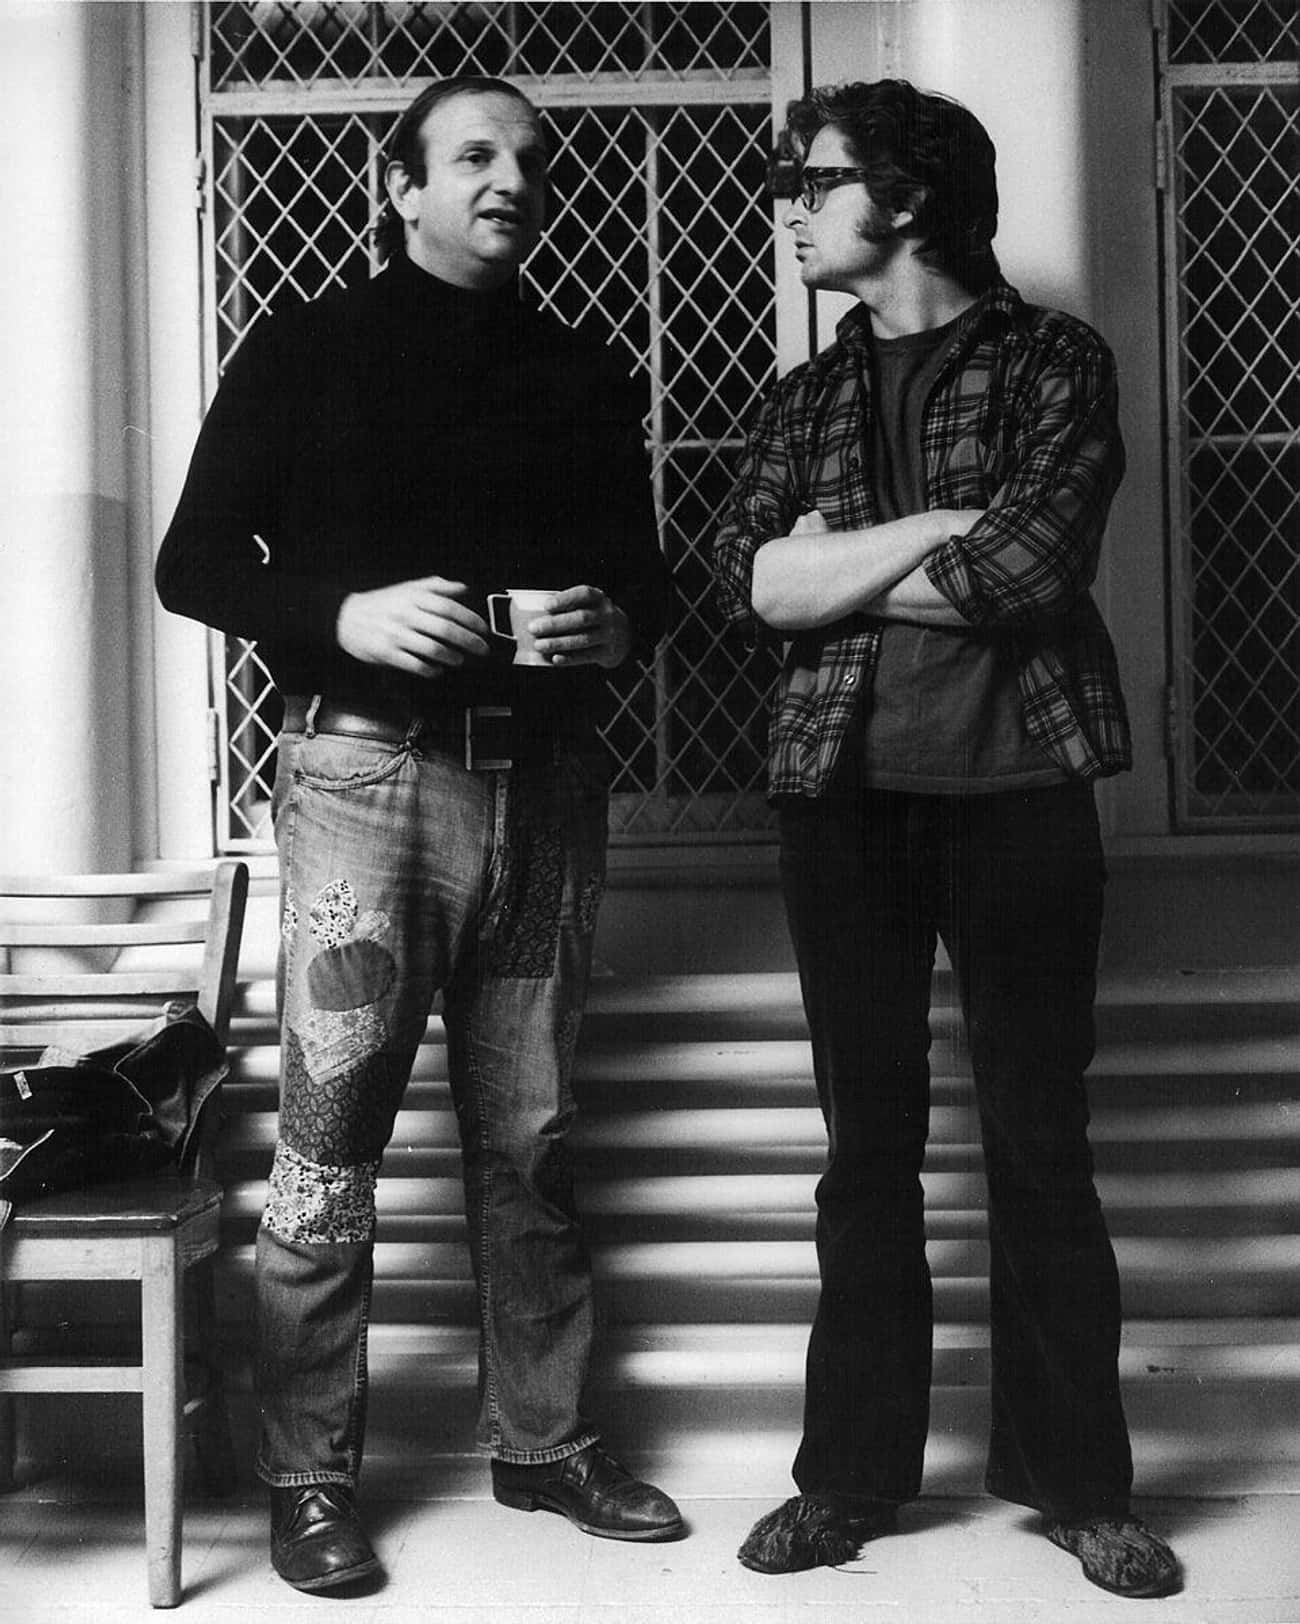 Bo Goldman And Michael Douglas On The Set Of 'One Flew Over the Cuckoo's Nest'